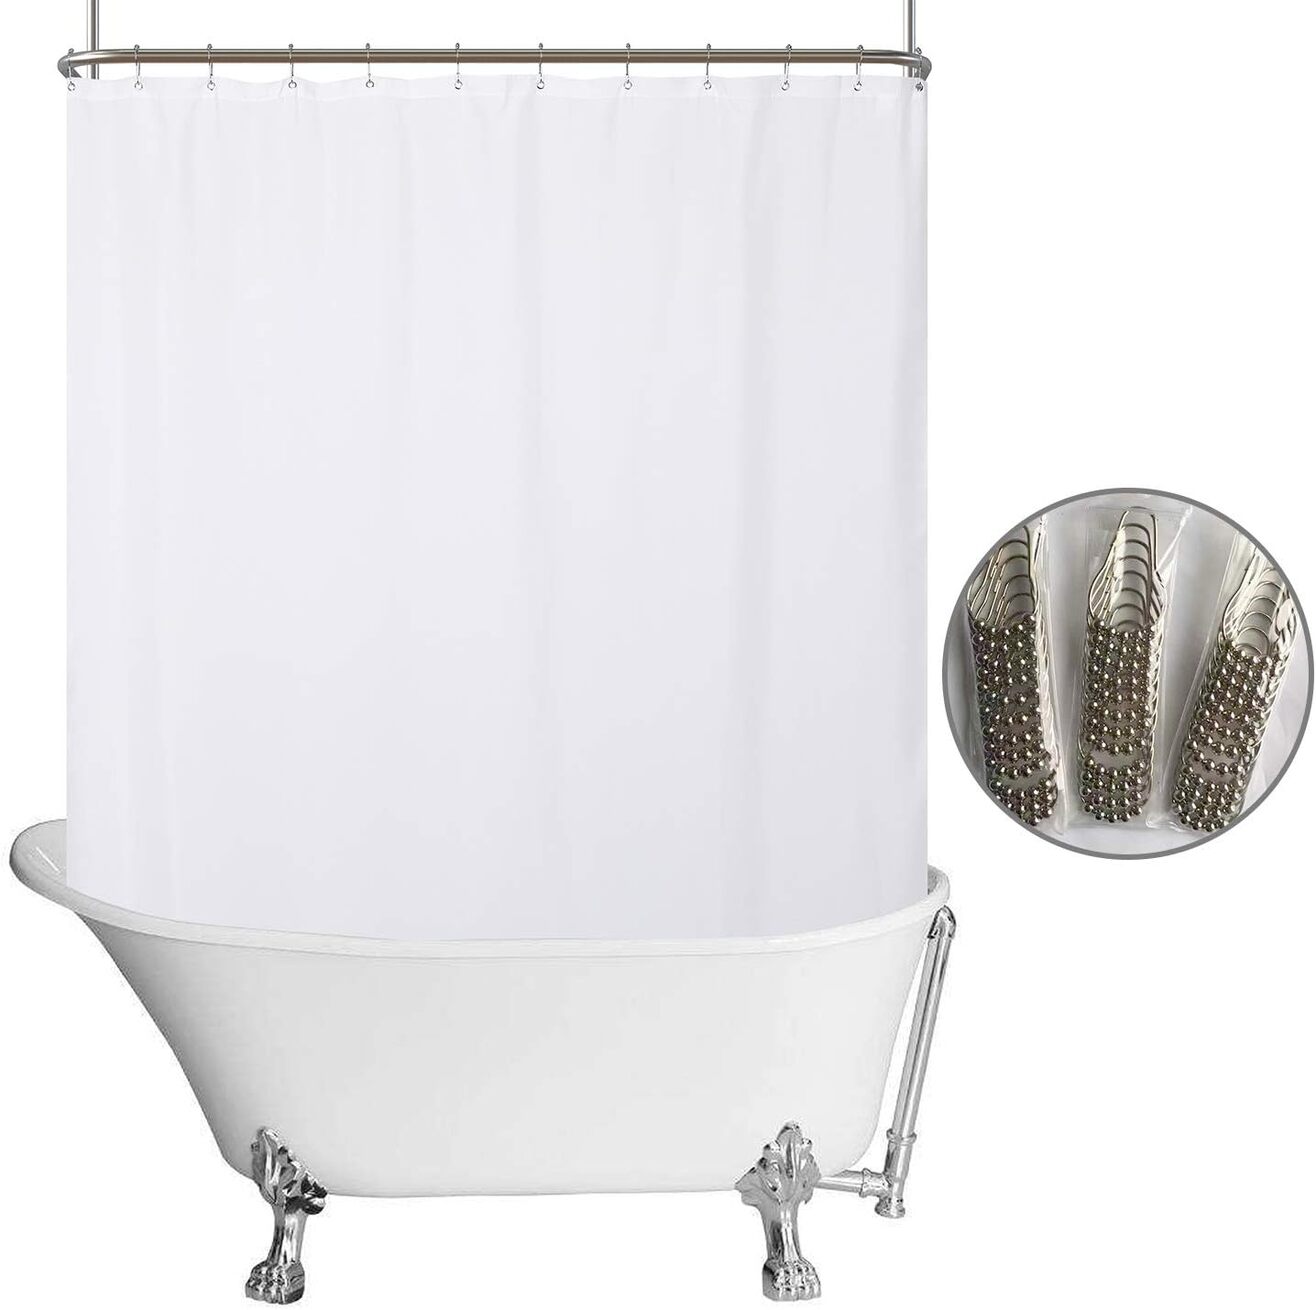 The-10-Best-Shower-Curtain-for-Clawfoot-Tub-TN